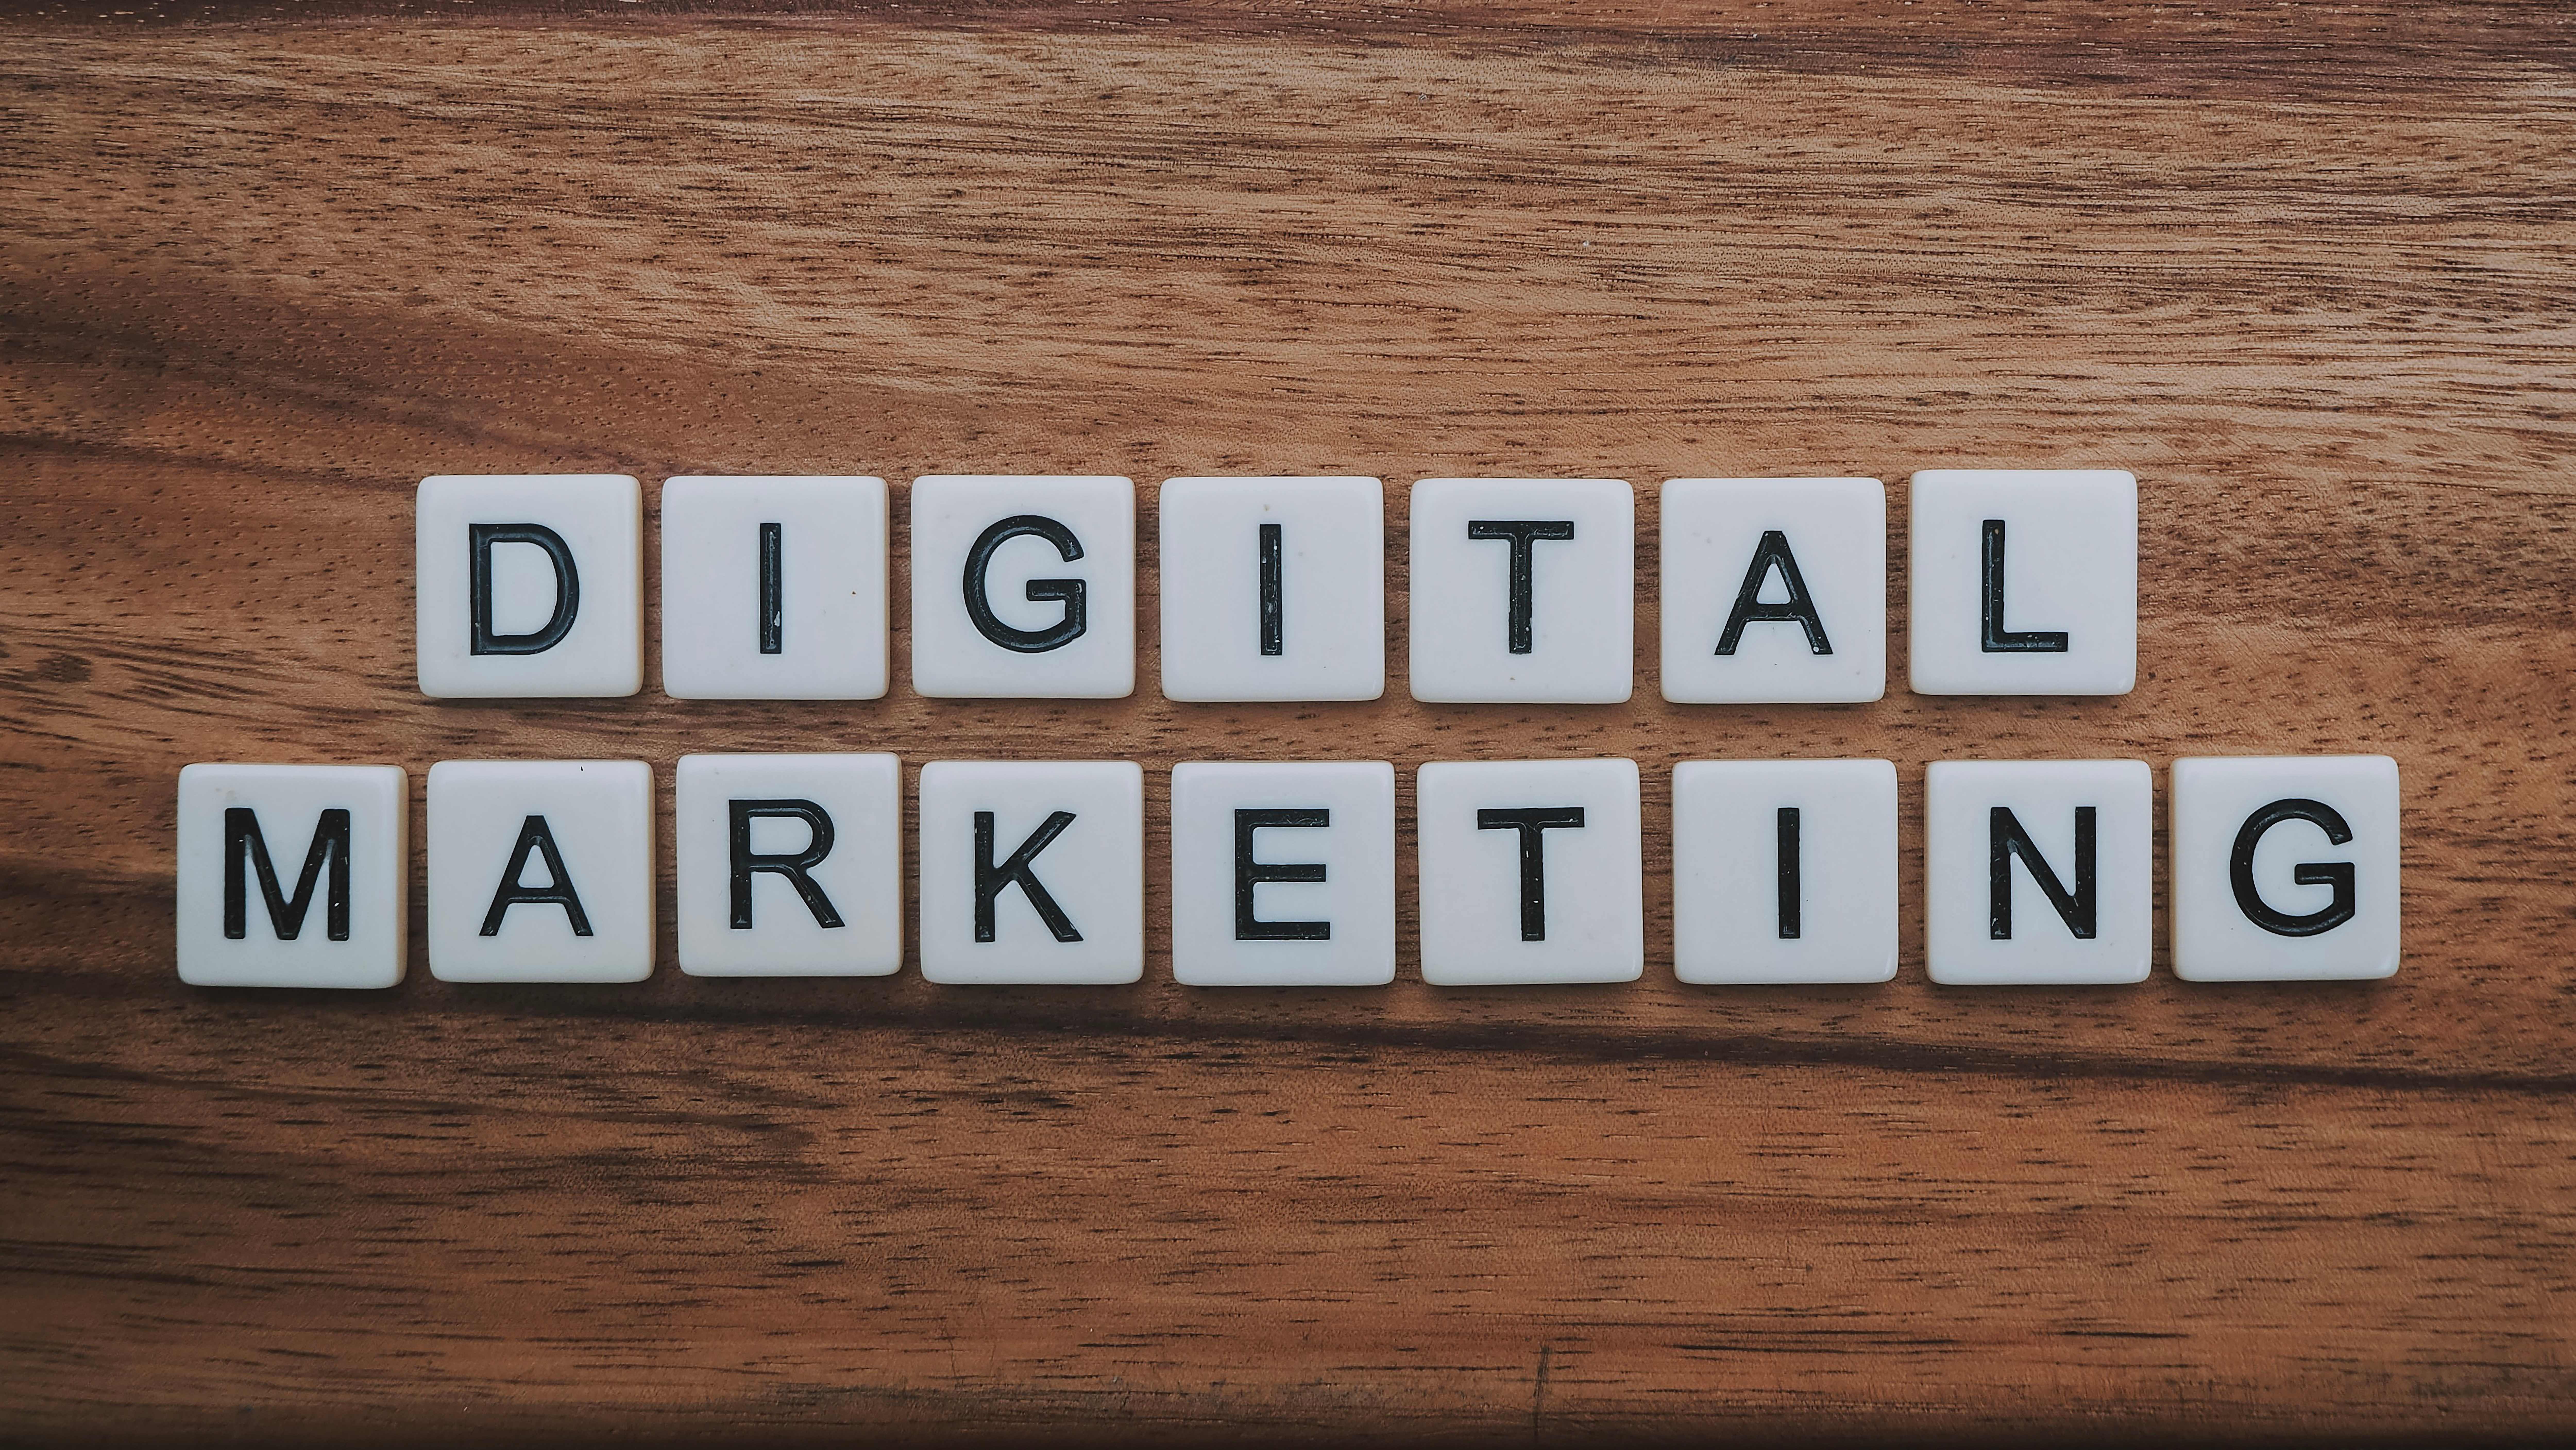 Scrabble tiles spell out the words “digital marketing.”